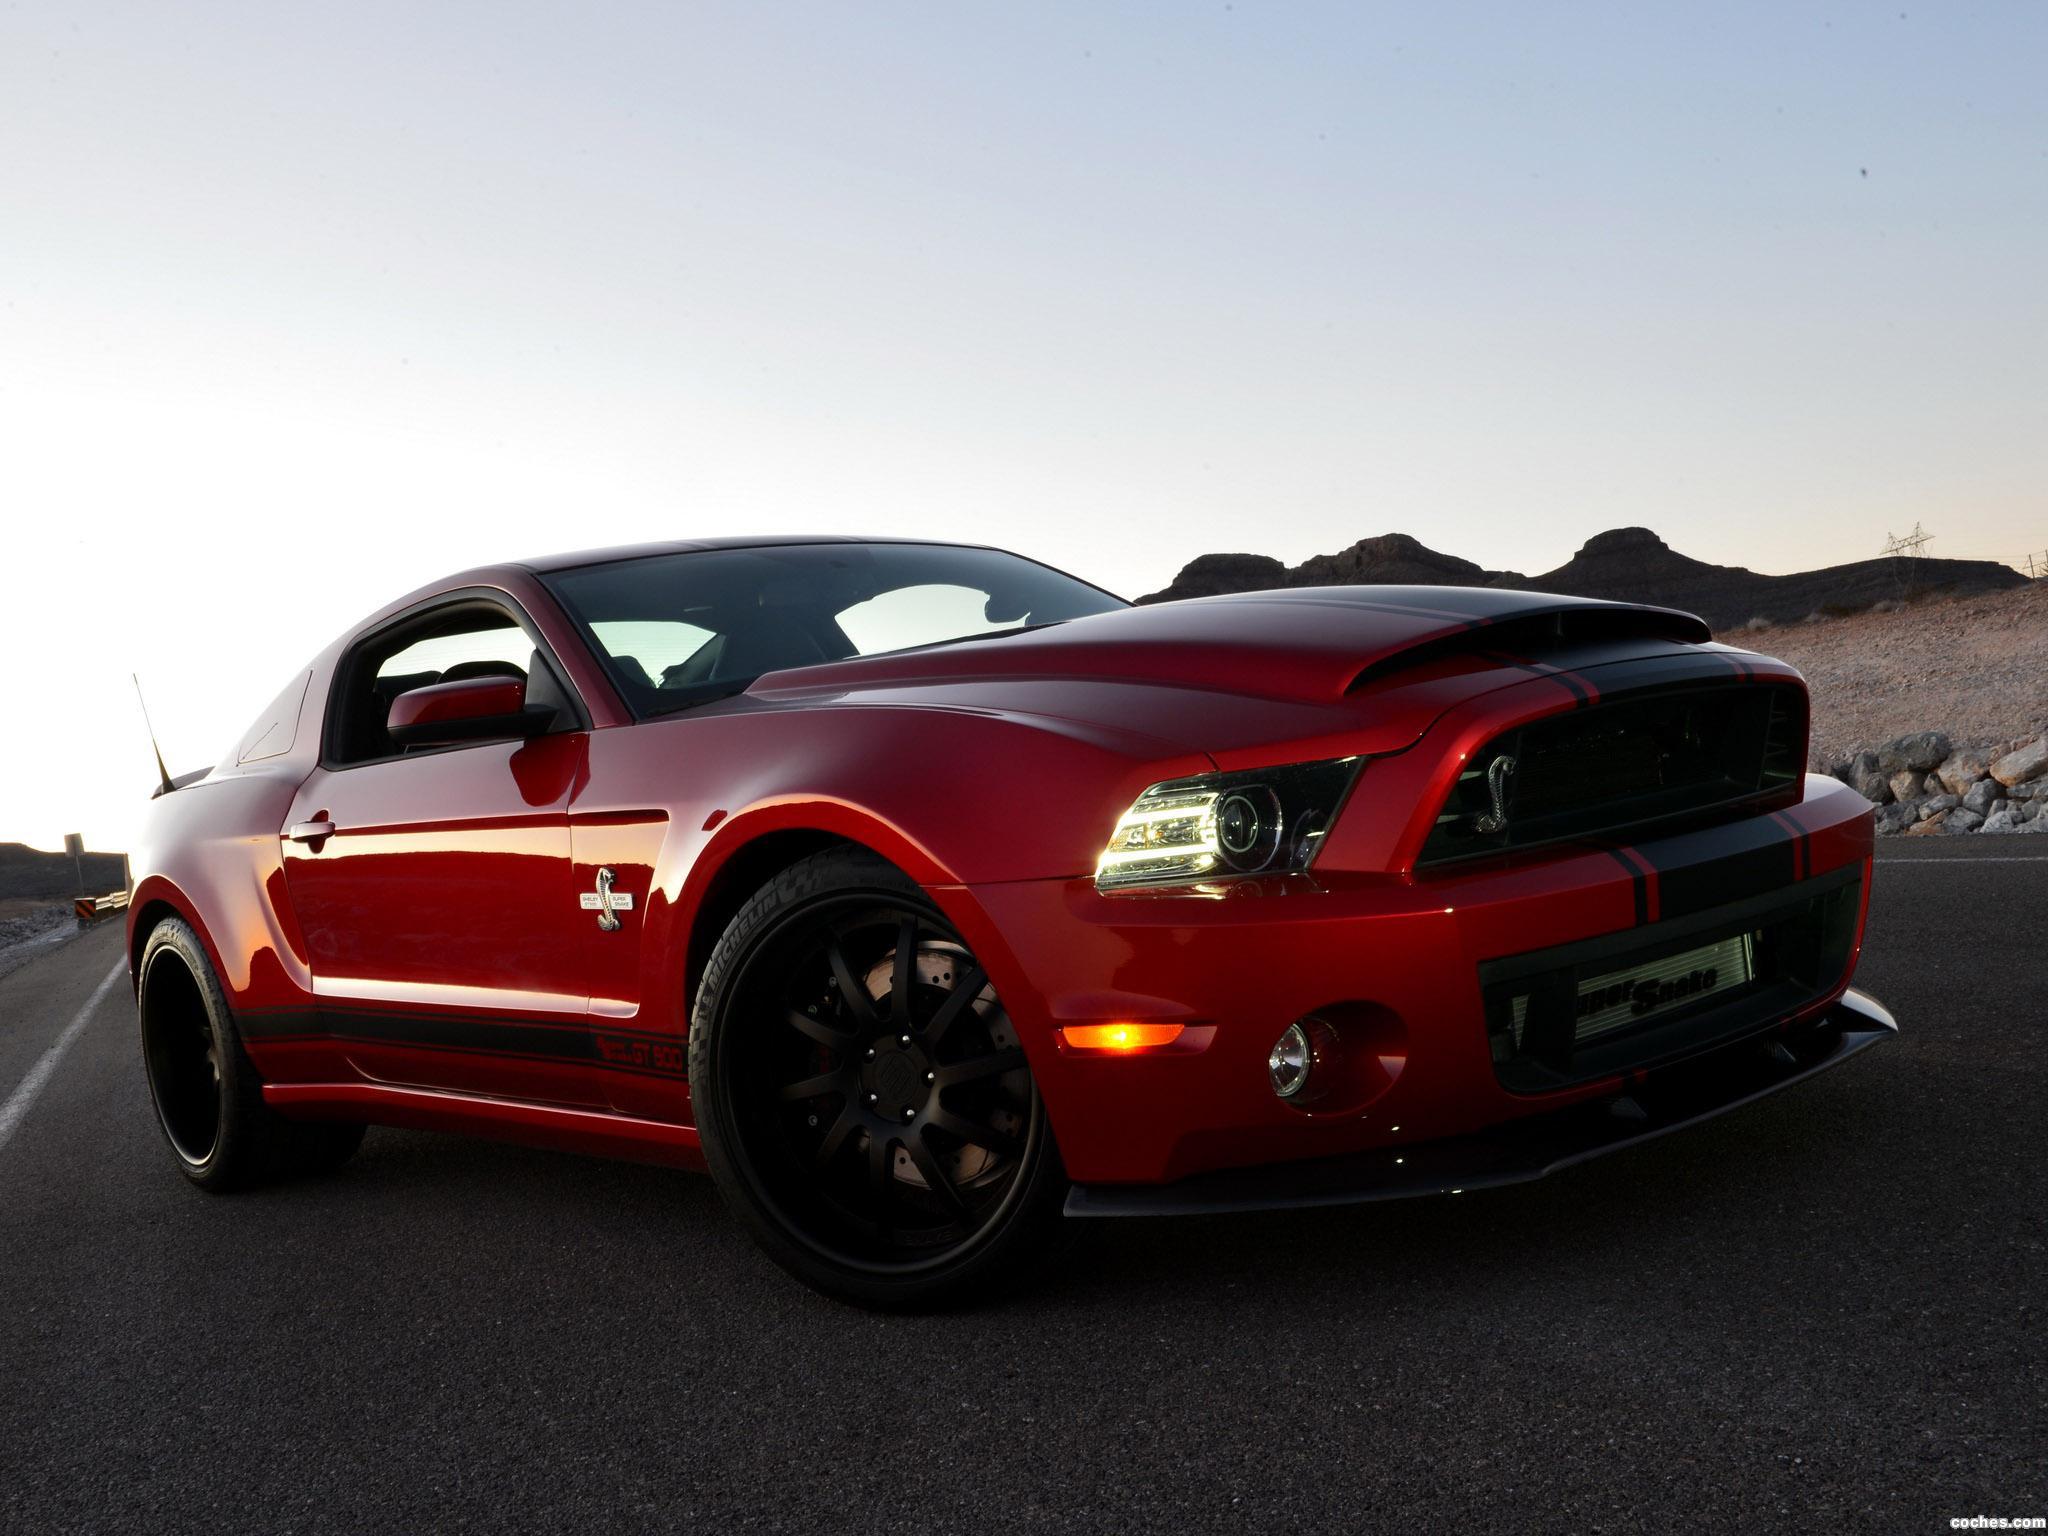 shelby_ford-mustang-gt500-super-snake-wide-body-2013_r1